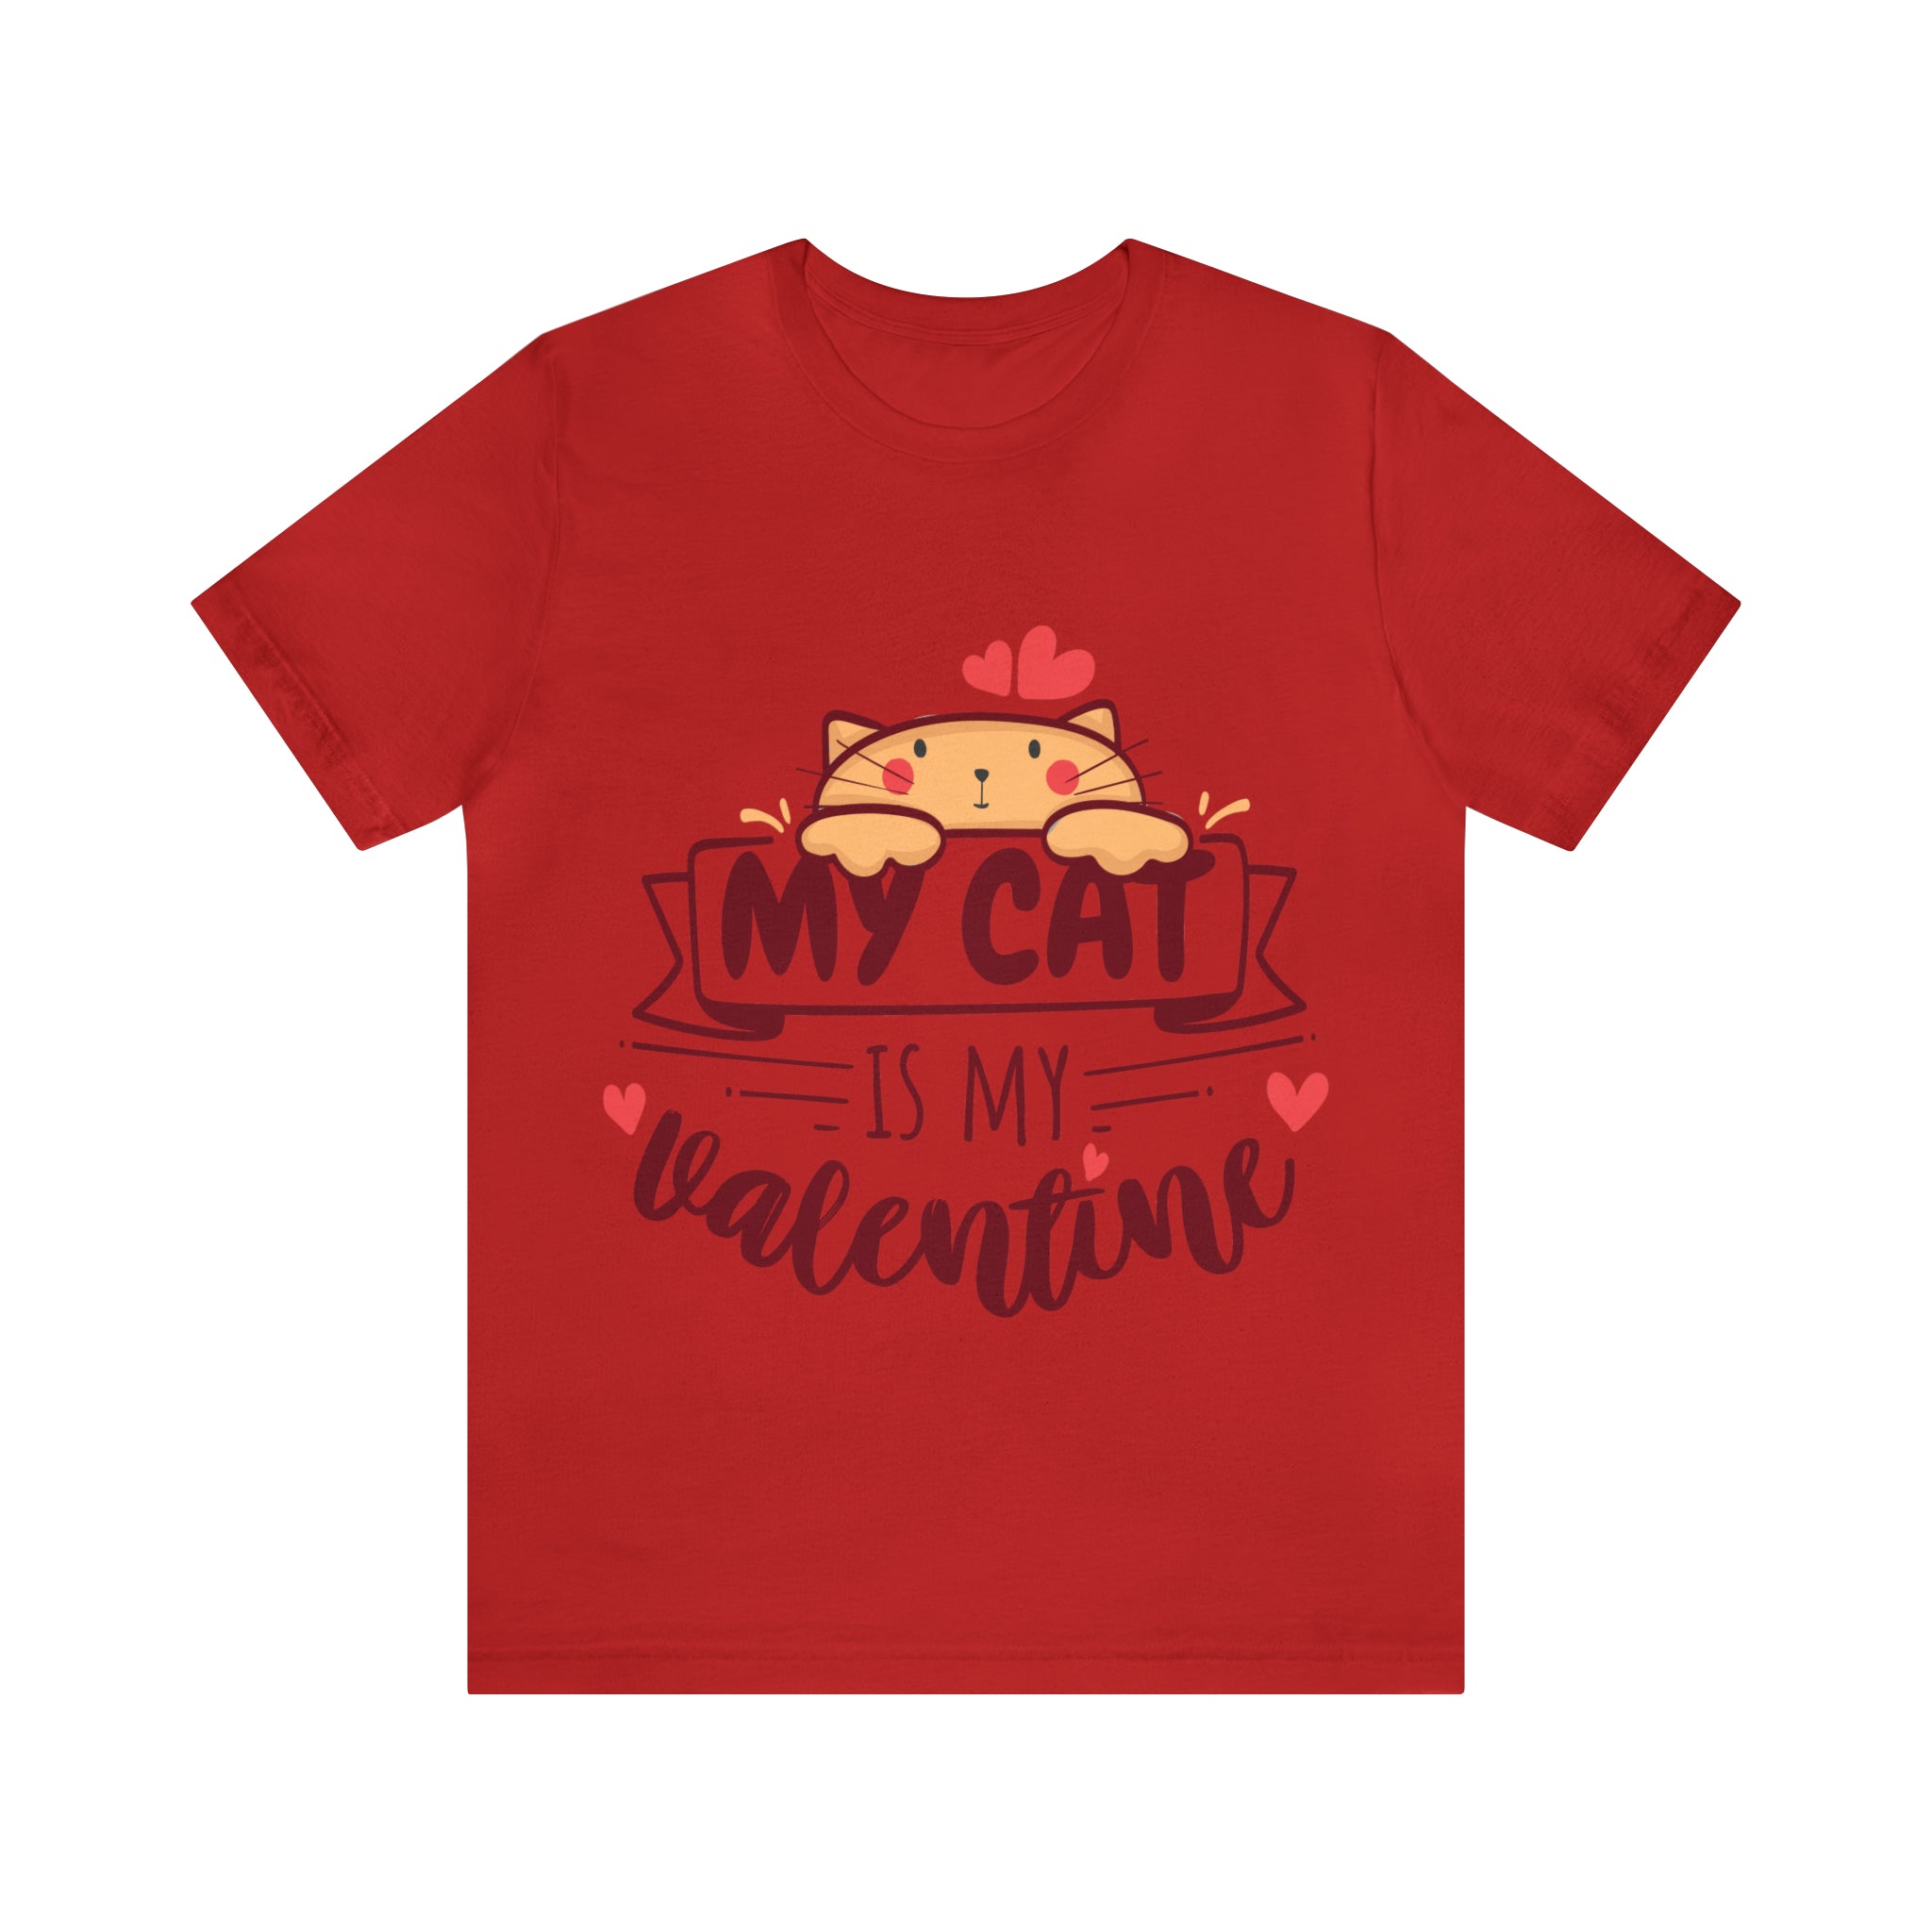 My Cat is my Valentine t-shirt - red